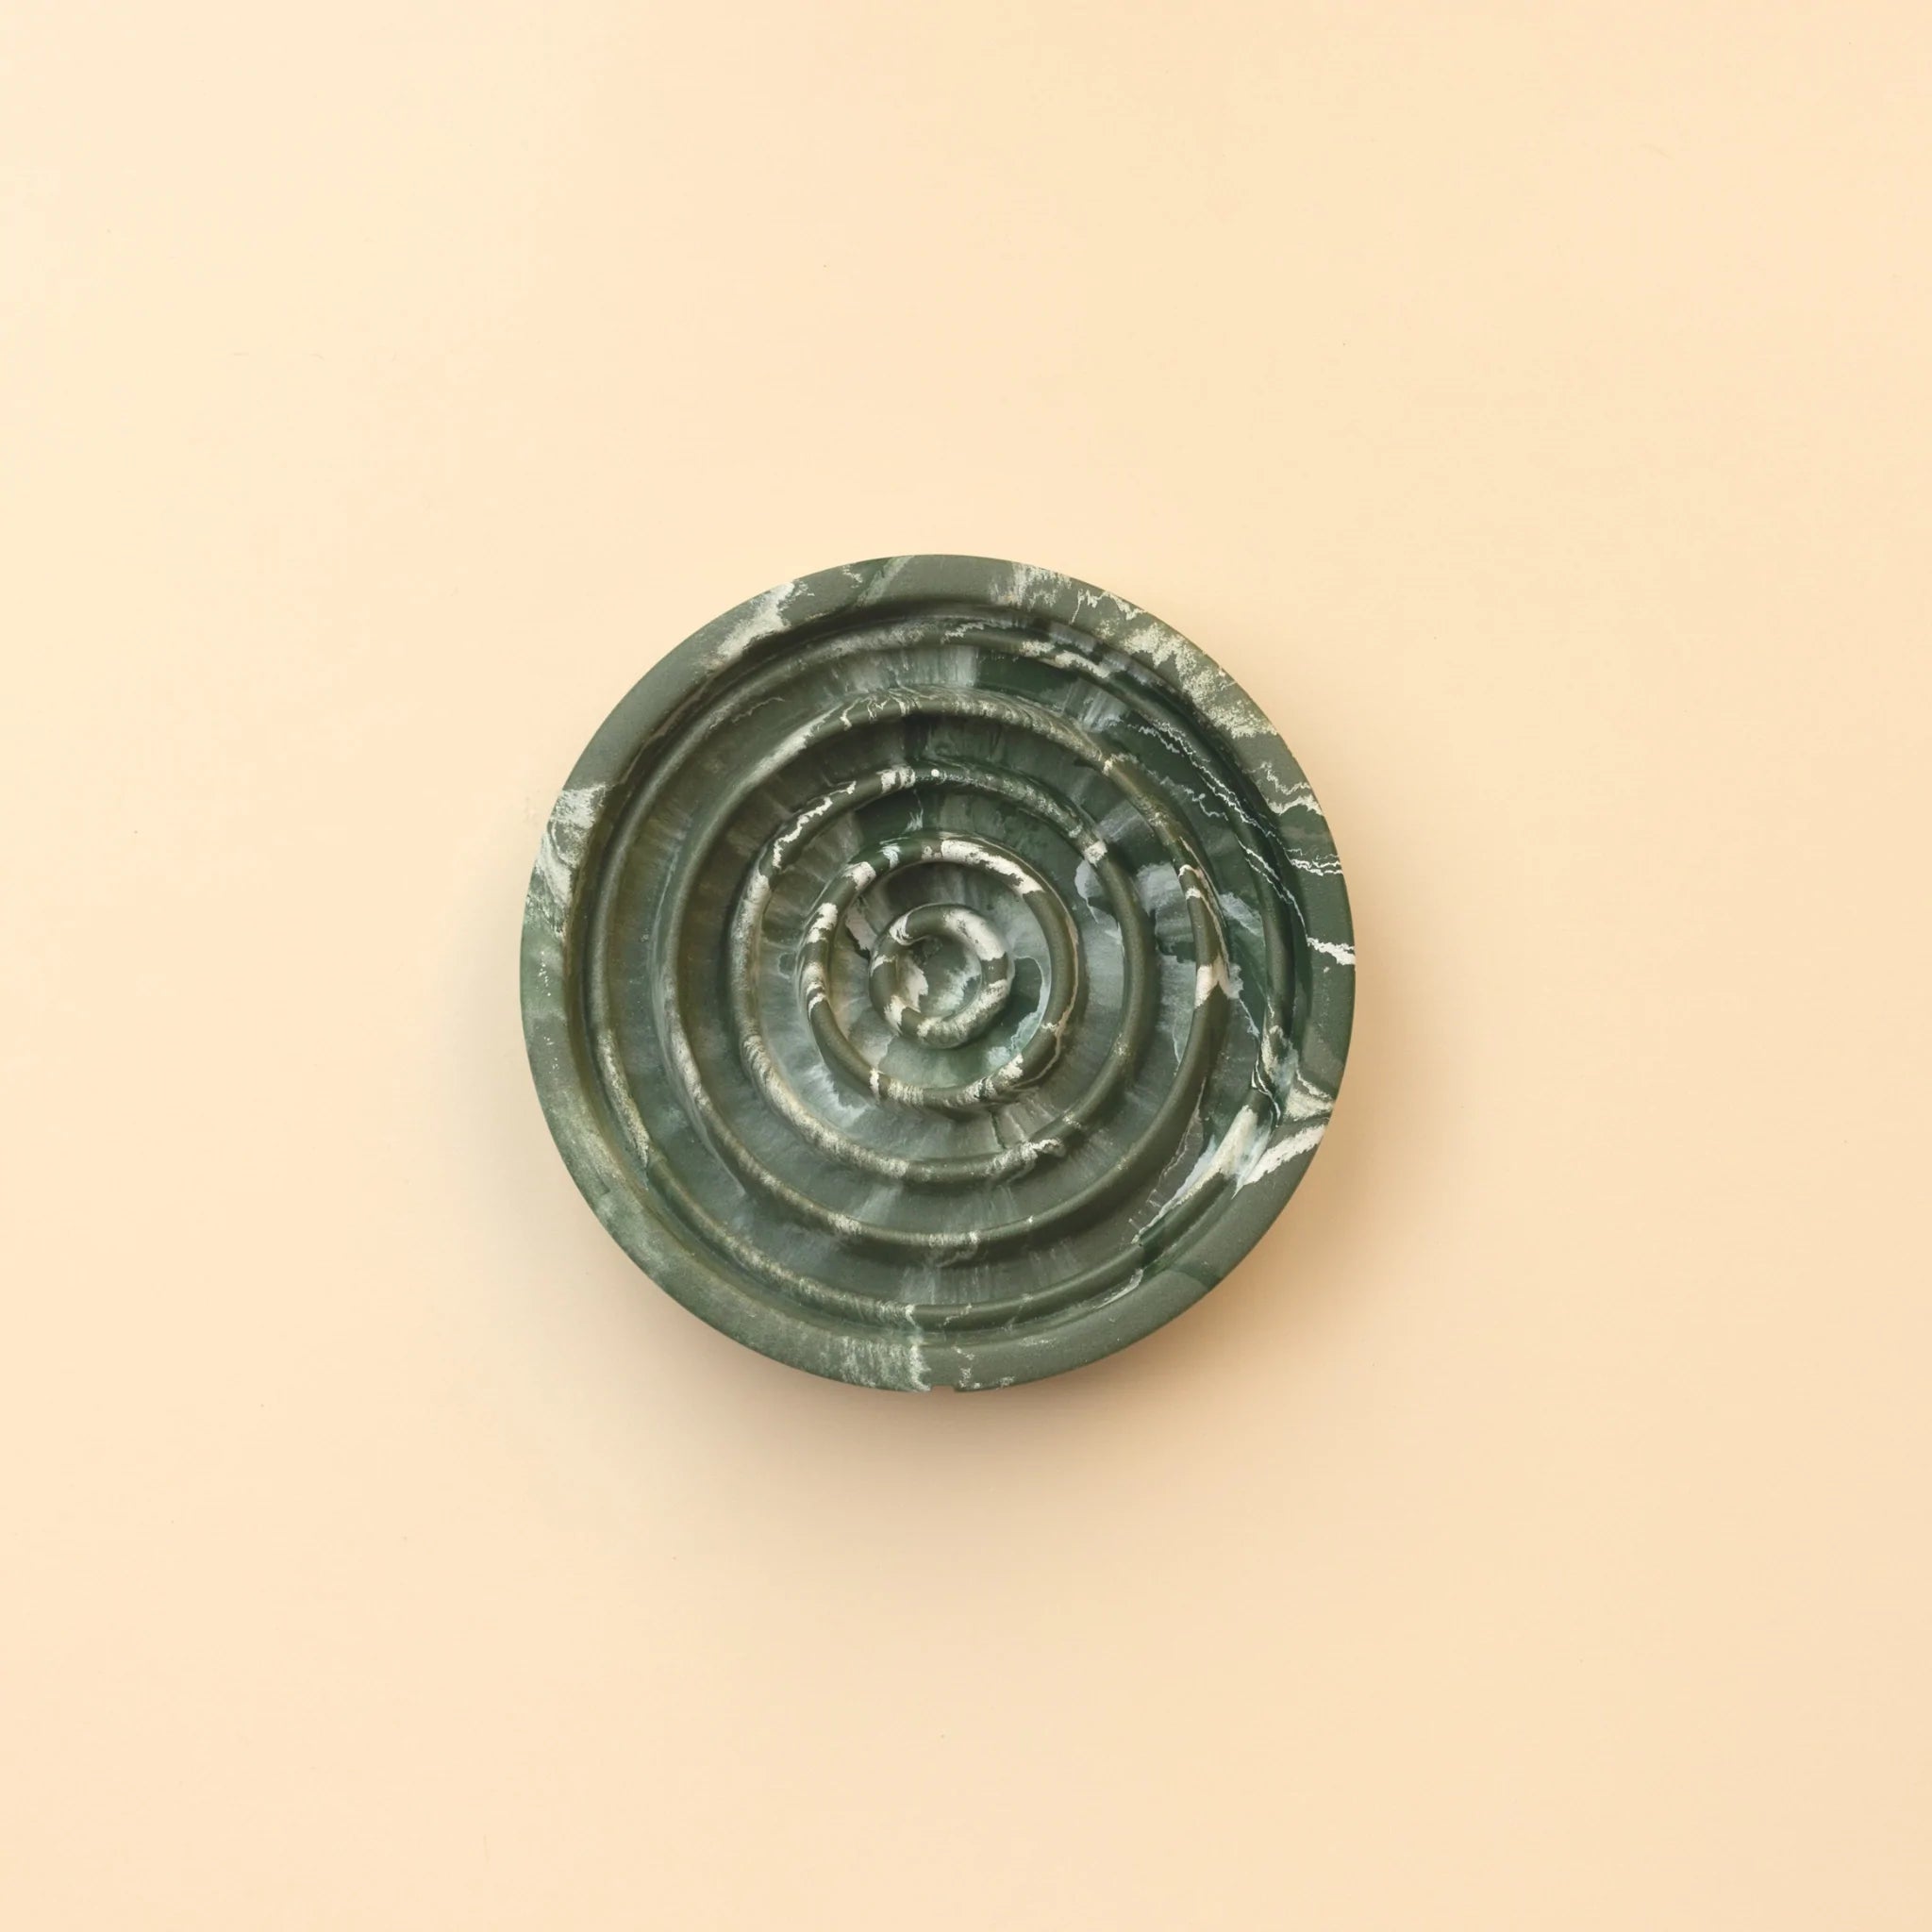 Slow Feeder Small Bowl - Duck Green Marble